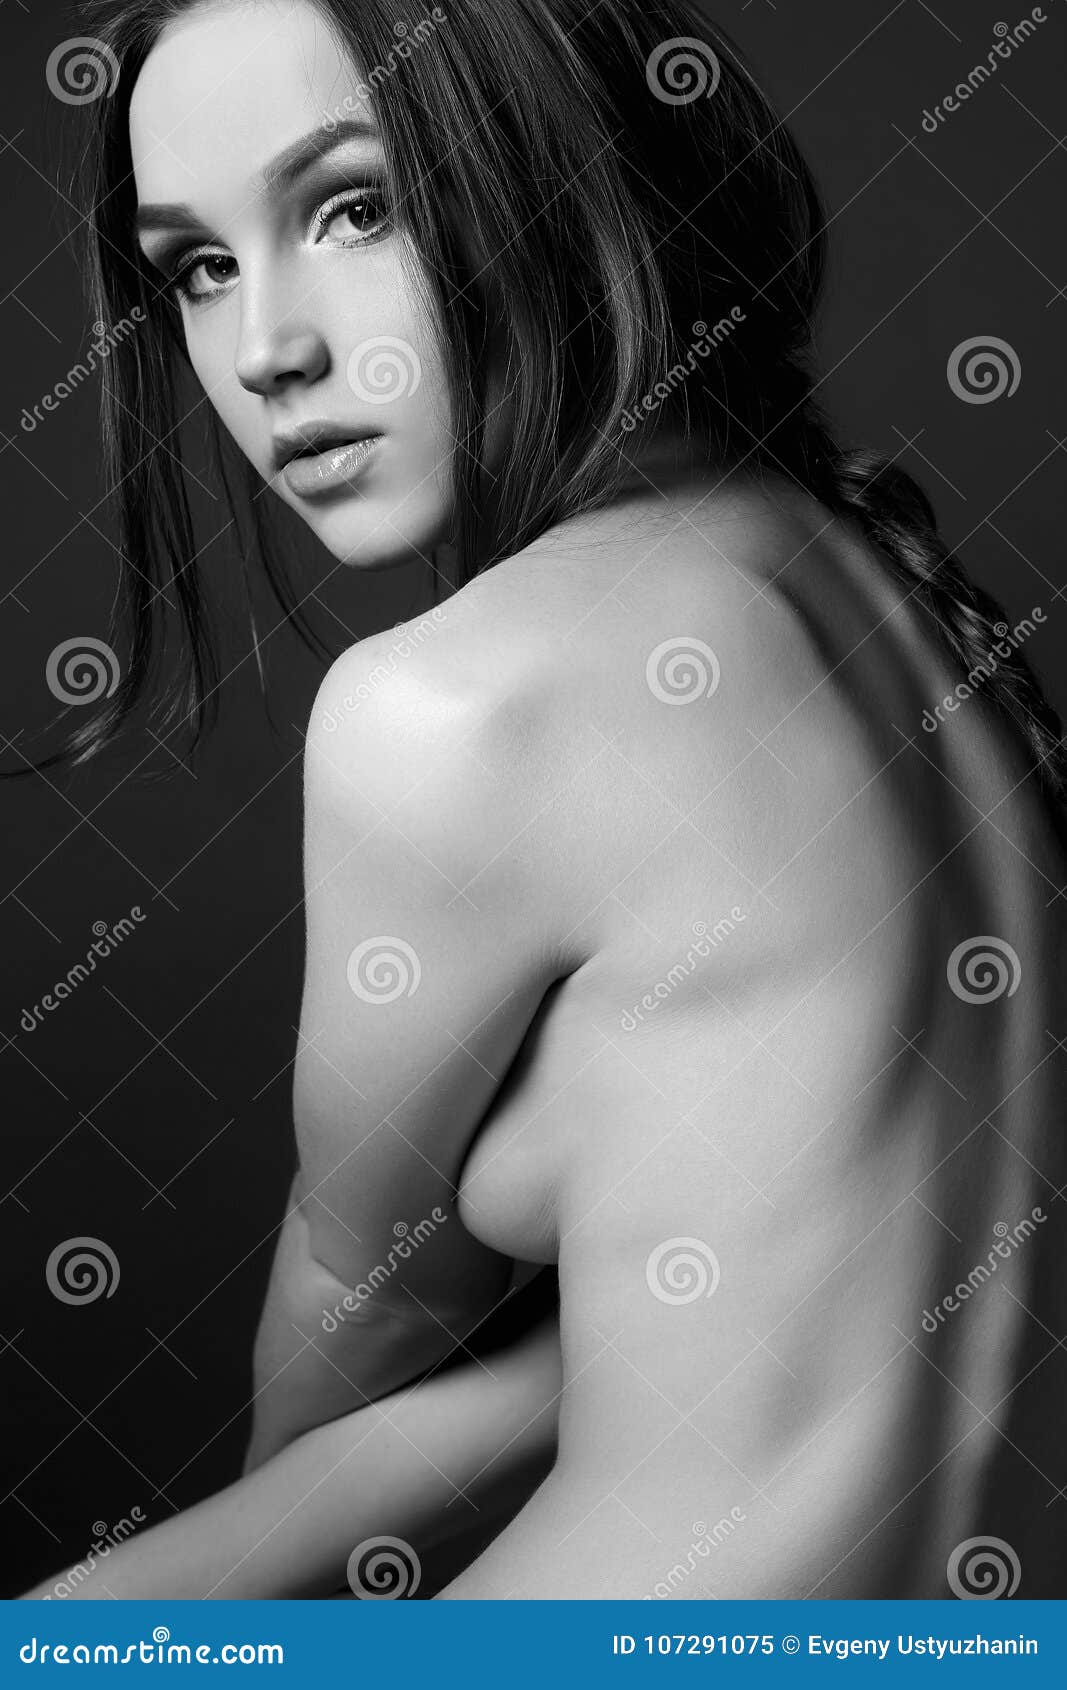 Black On White Nude Girls - Black and White Portrait. Young Nude Woman Stock Image - Image of care,  eyes: 107291075